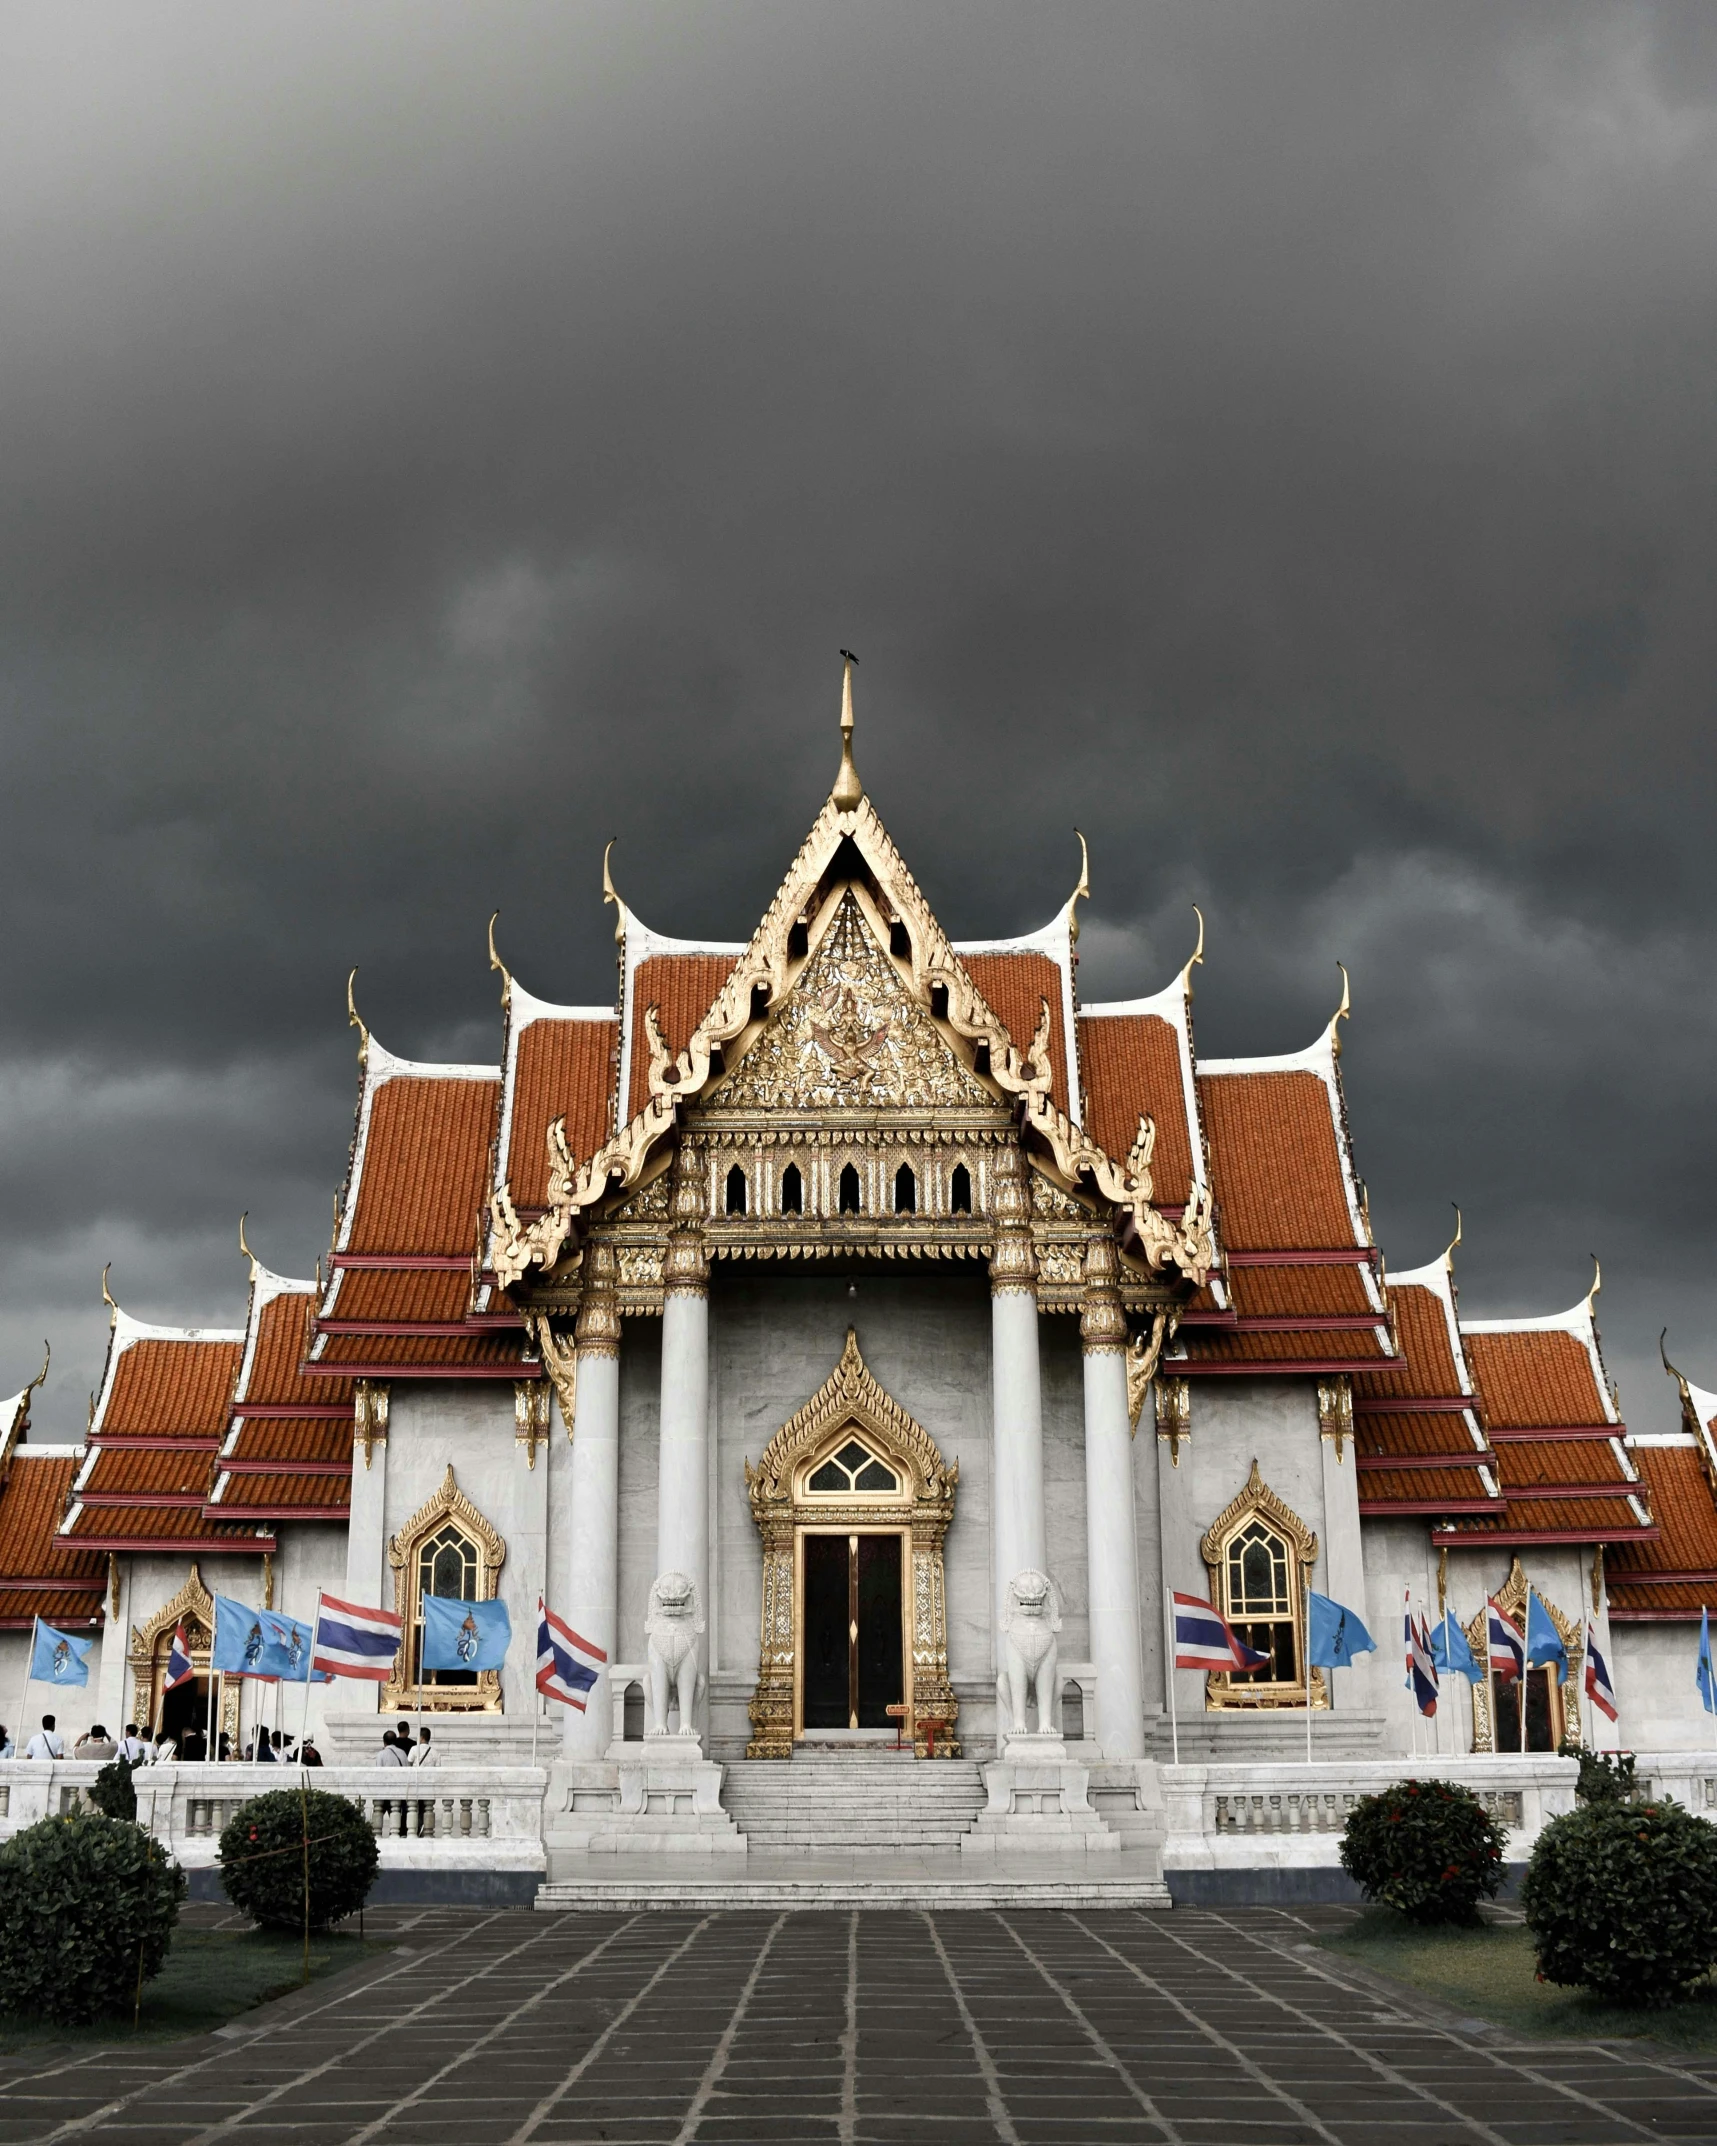 a large white building with a red roof, a marble sculpture, inspired by Thomas Struth, unsplash contest winner, thai temple, grey skies with two rainbows, ominous clouds, album cover